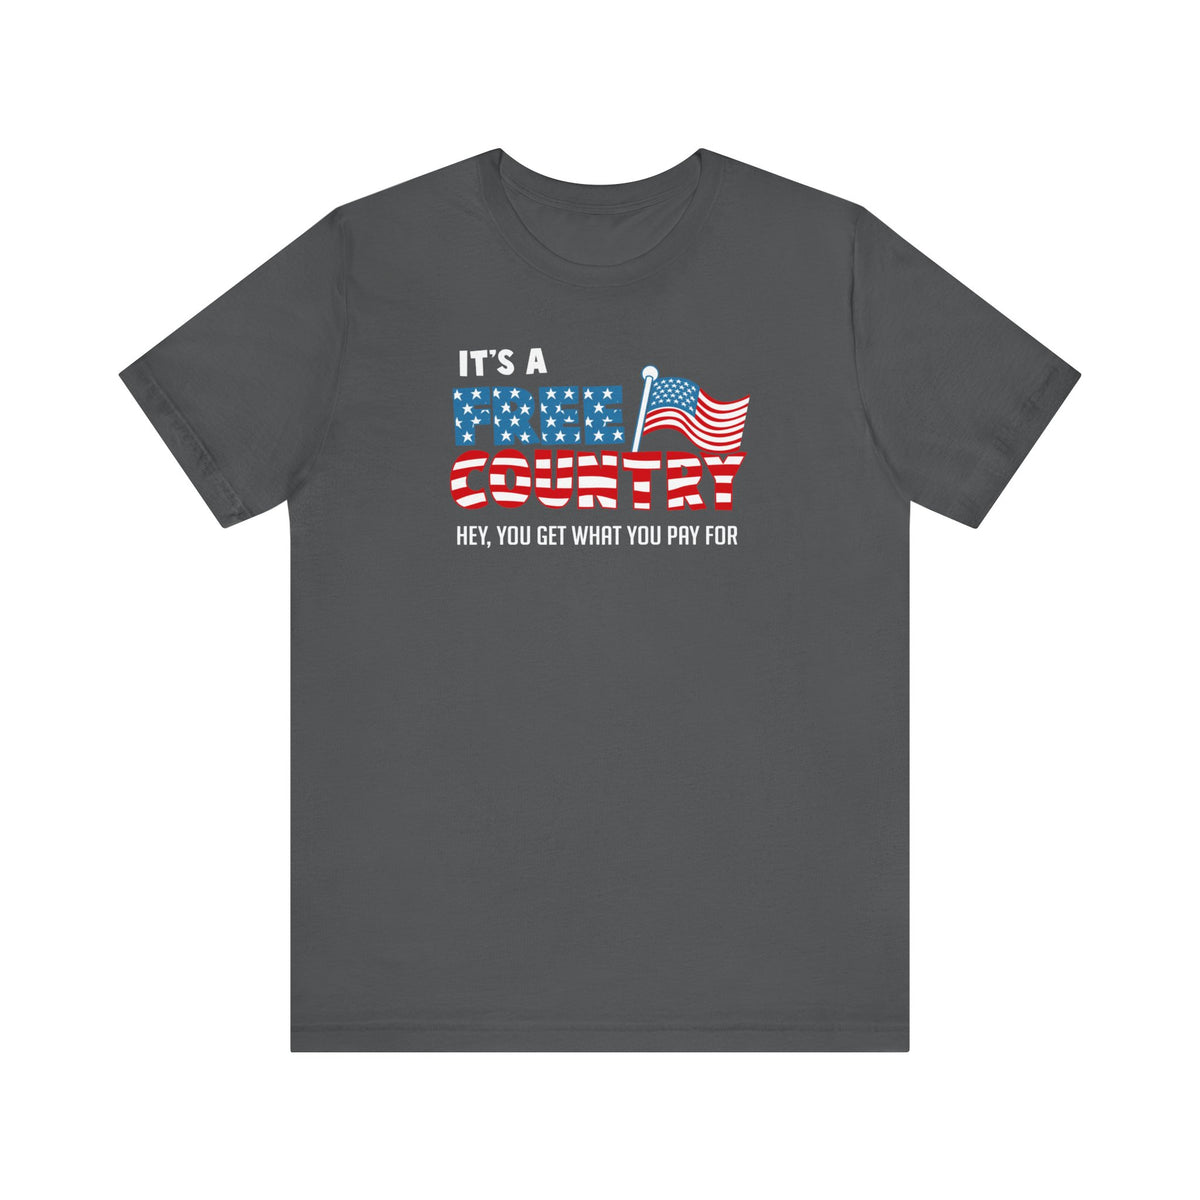 It's A Free Country - Hey You Get What You Pay For  - Men's T-Shirt